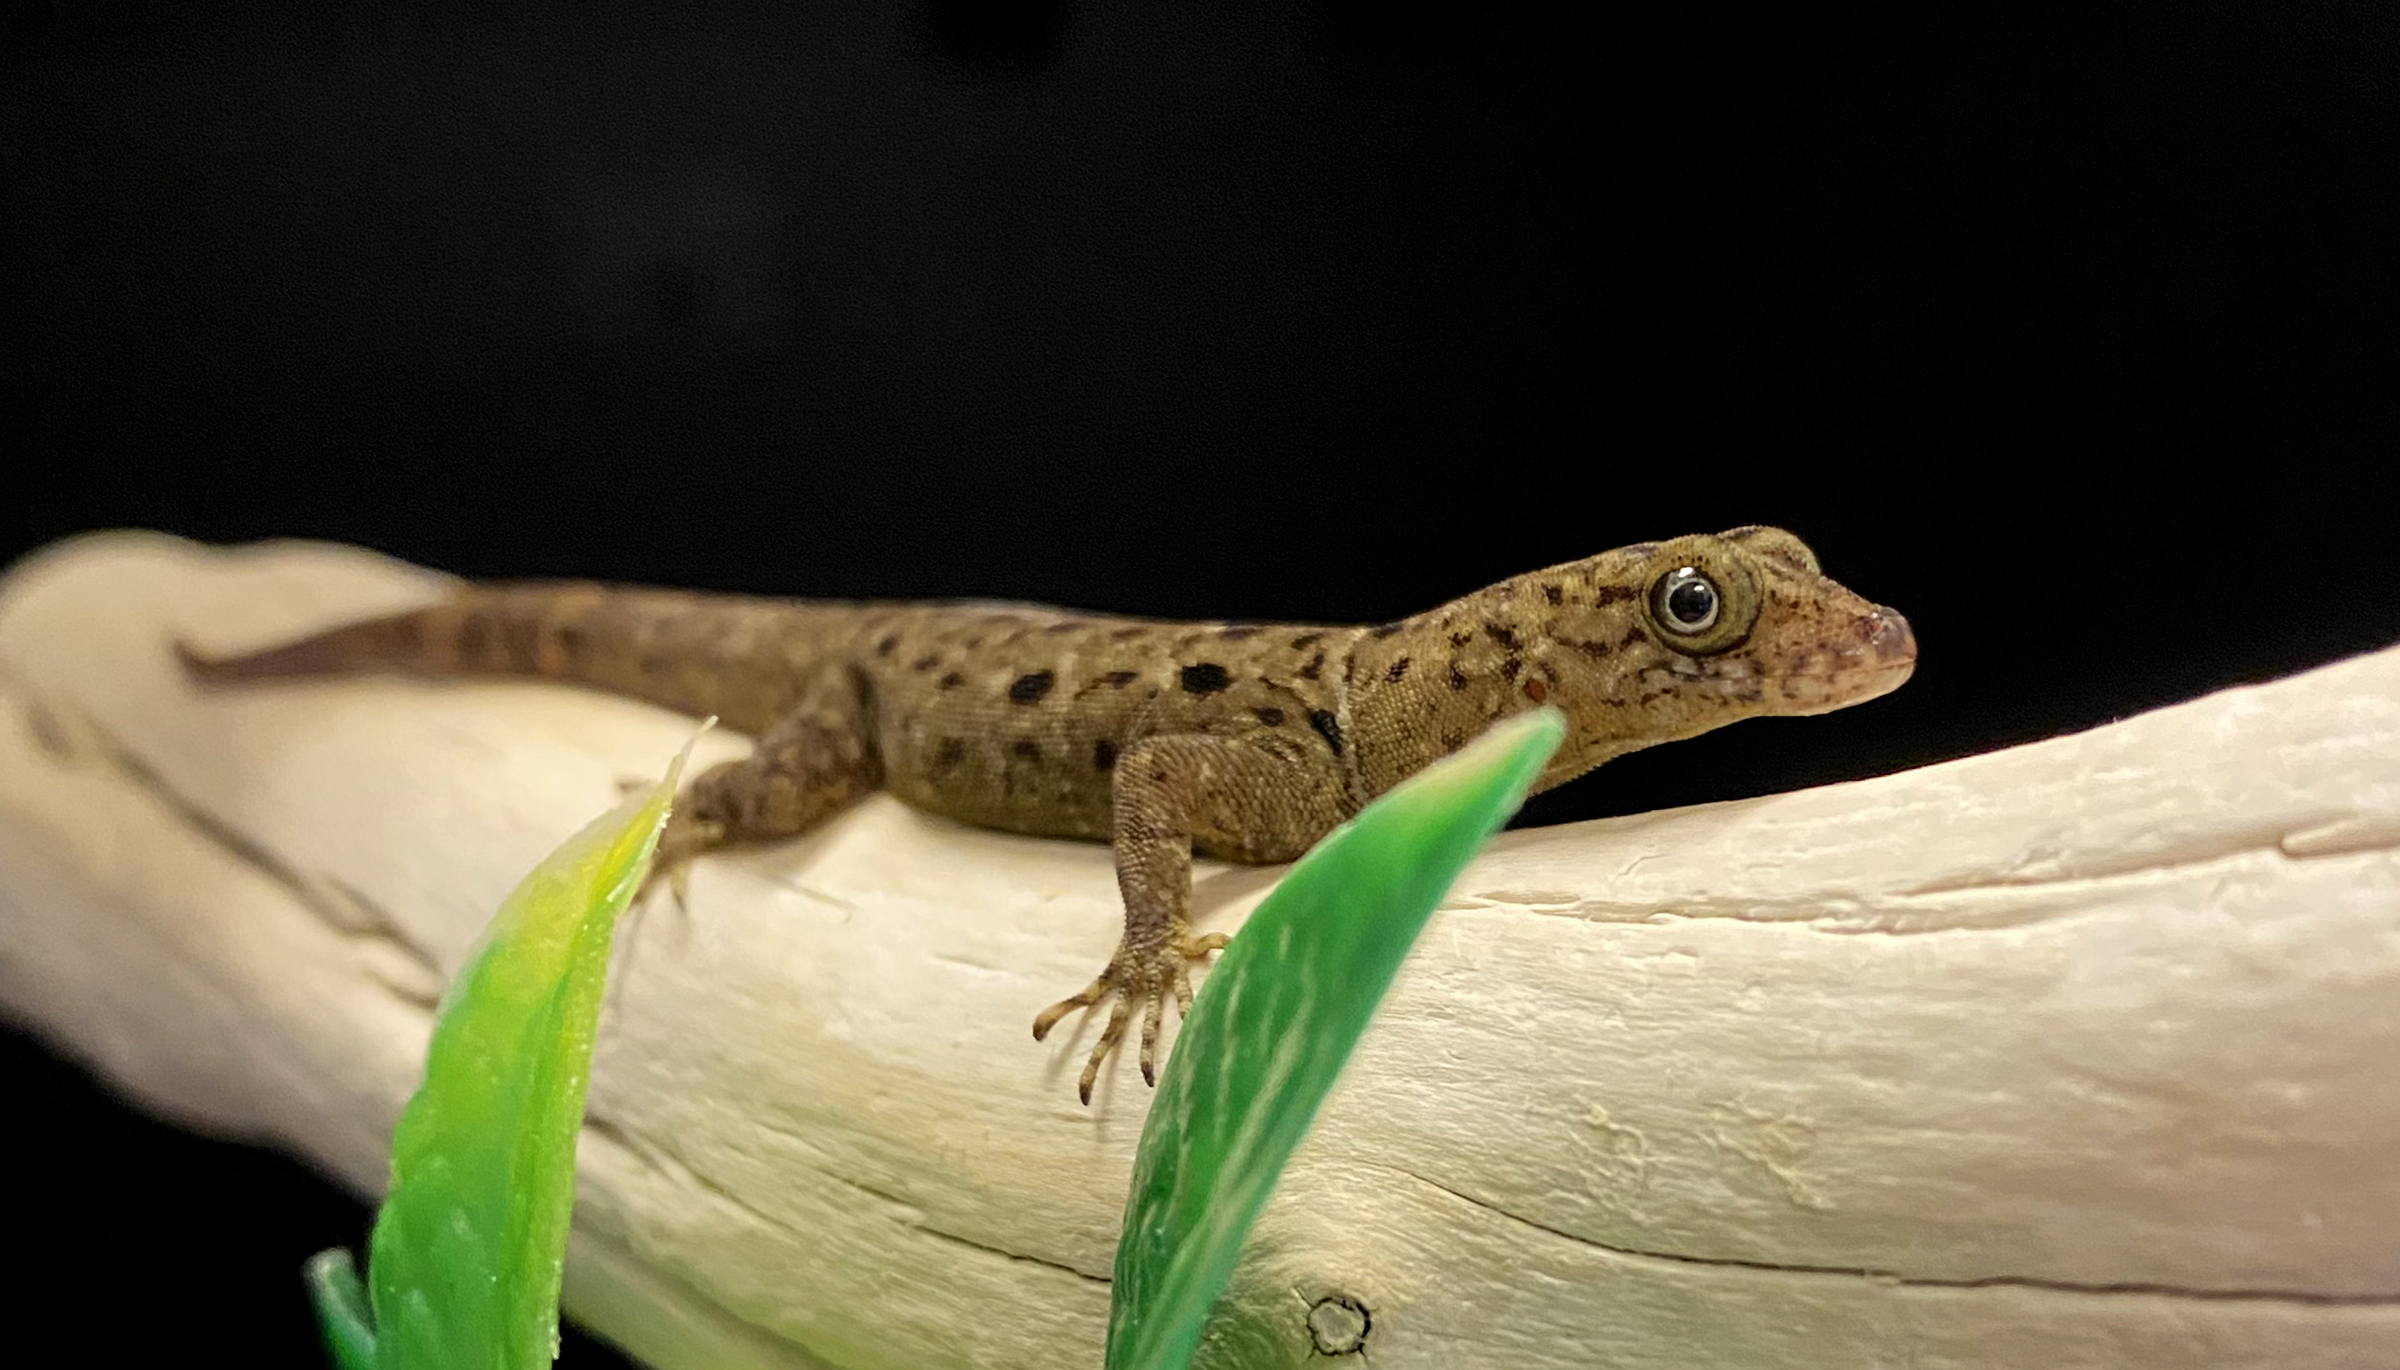 Because their eyes have similar structures to ours, geckos (like this Antilles gecko) are useful models for studying vision in humans. 